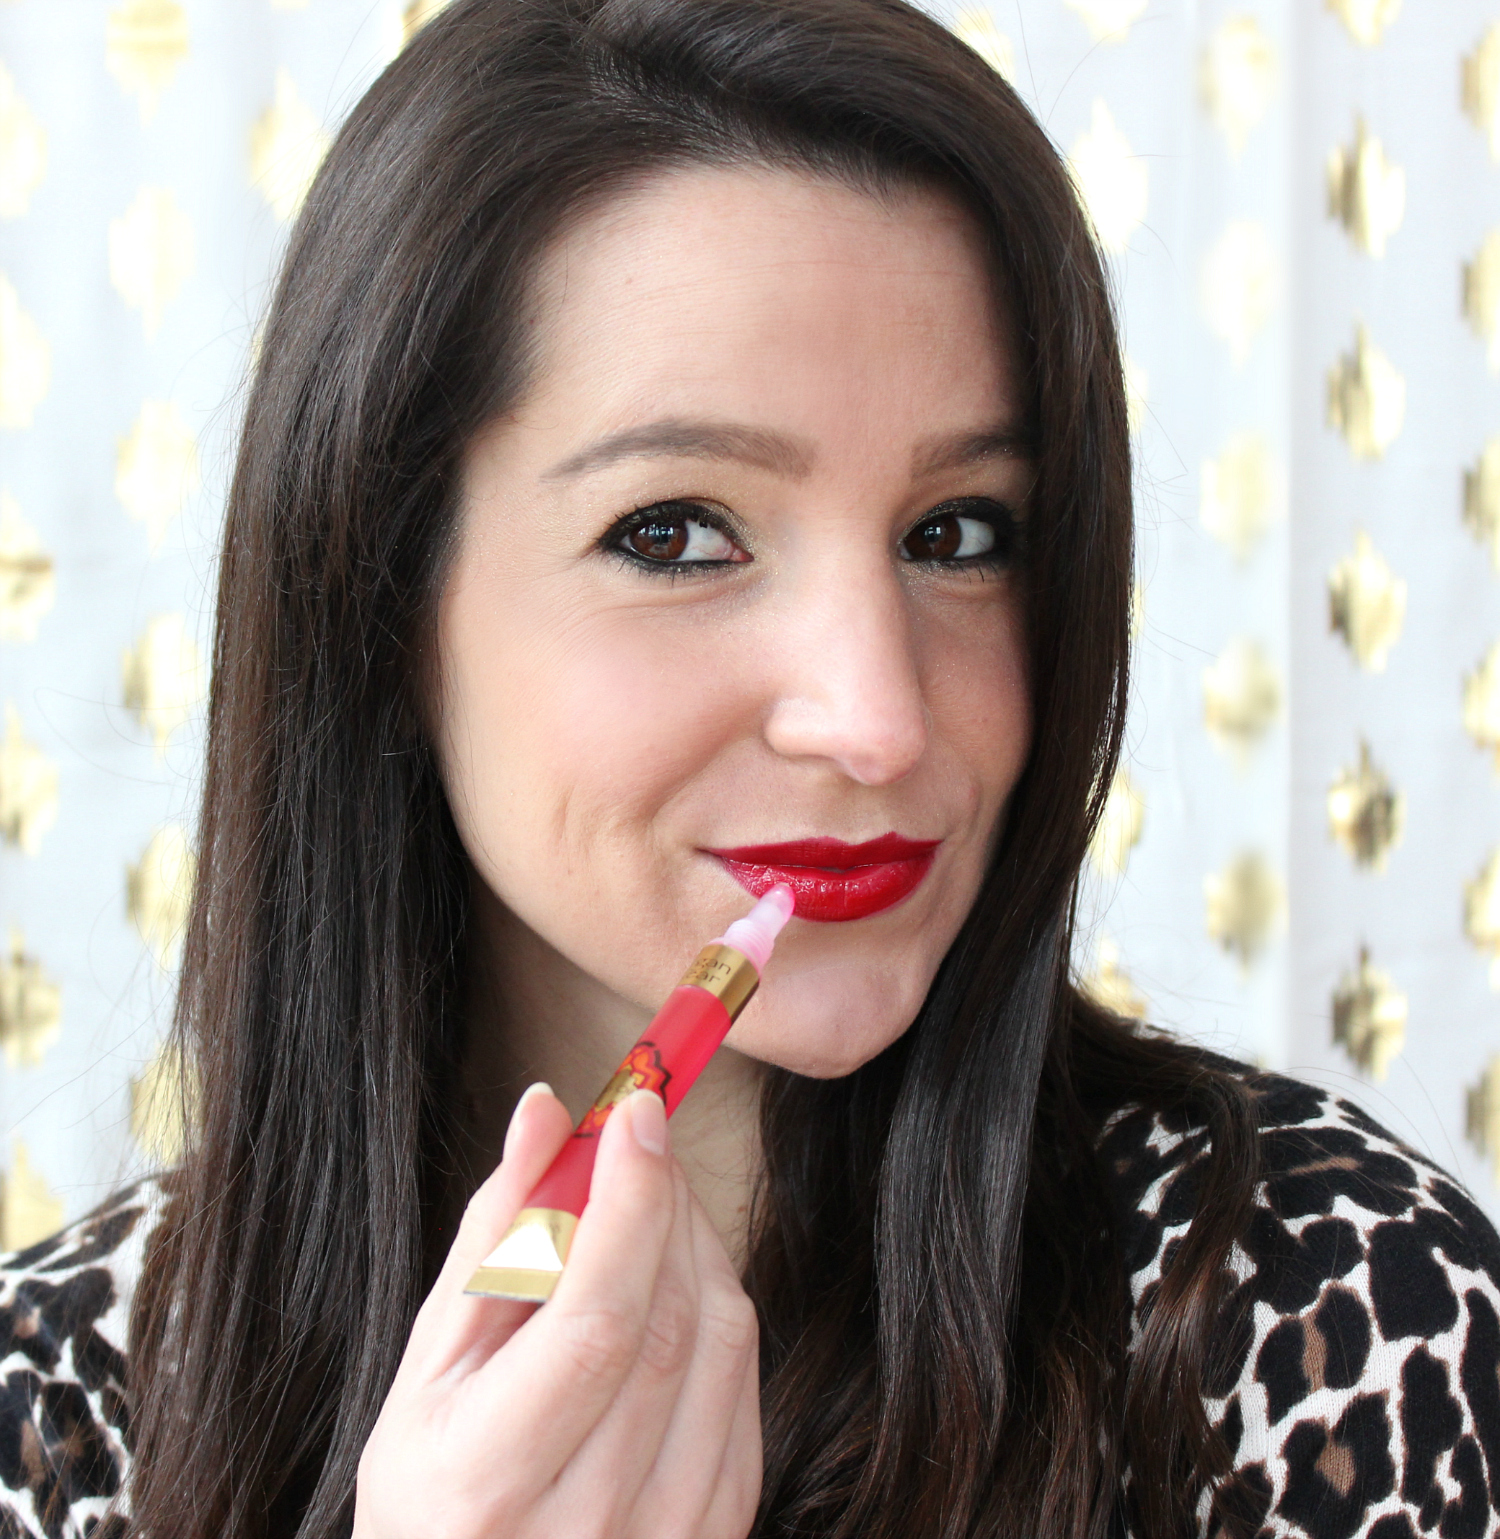 A fun and simple New Year's Eve makeup tutorial featuring affordable drugstore products